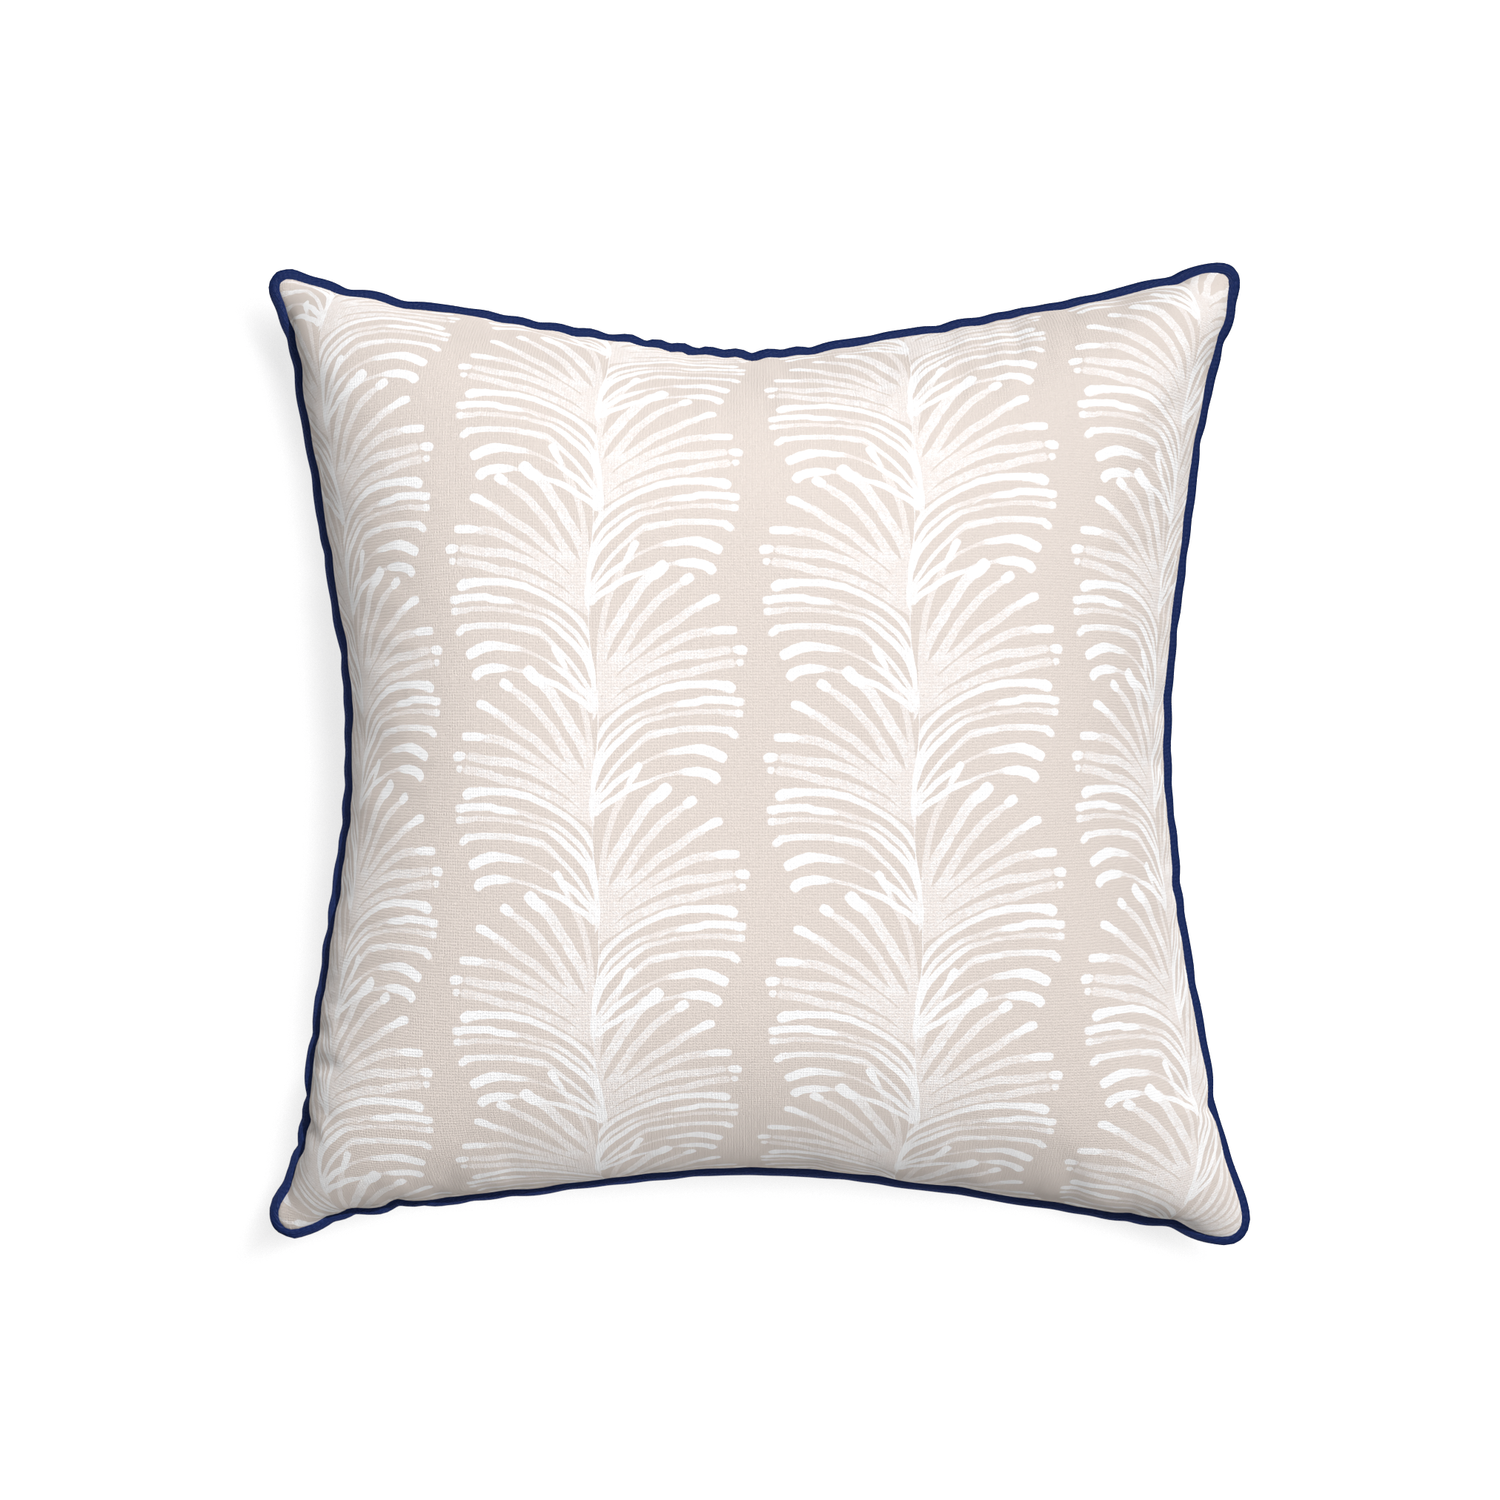 22-square emma sand custom sand colored botanical stripepillow with midnight piping on white background